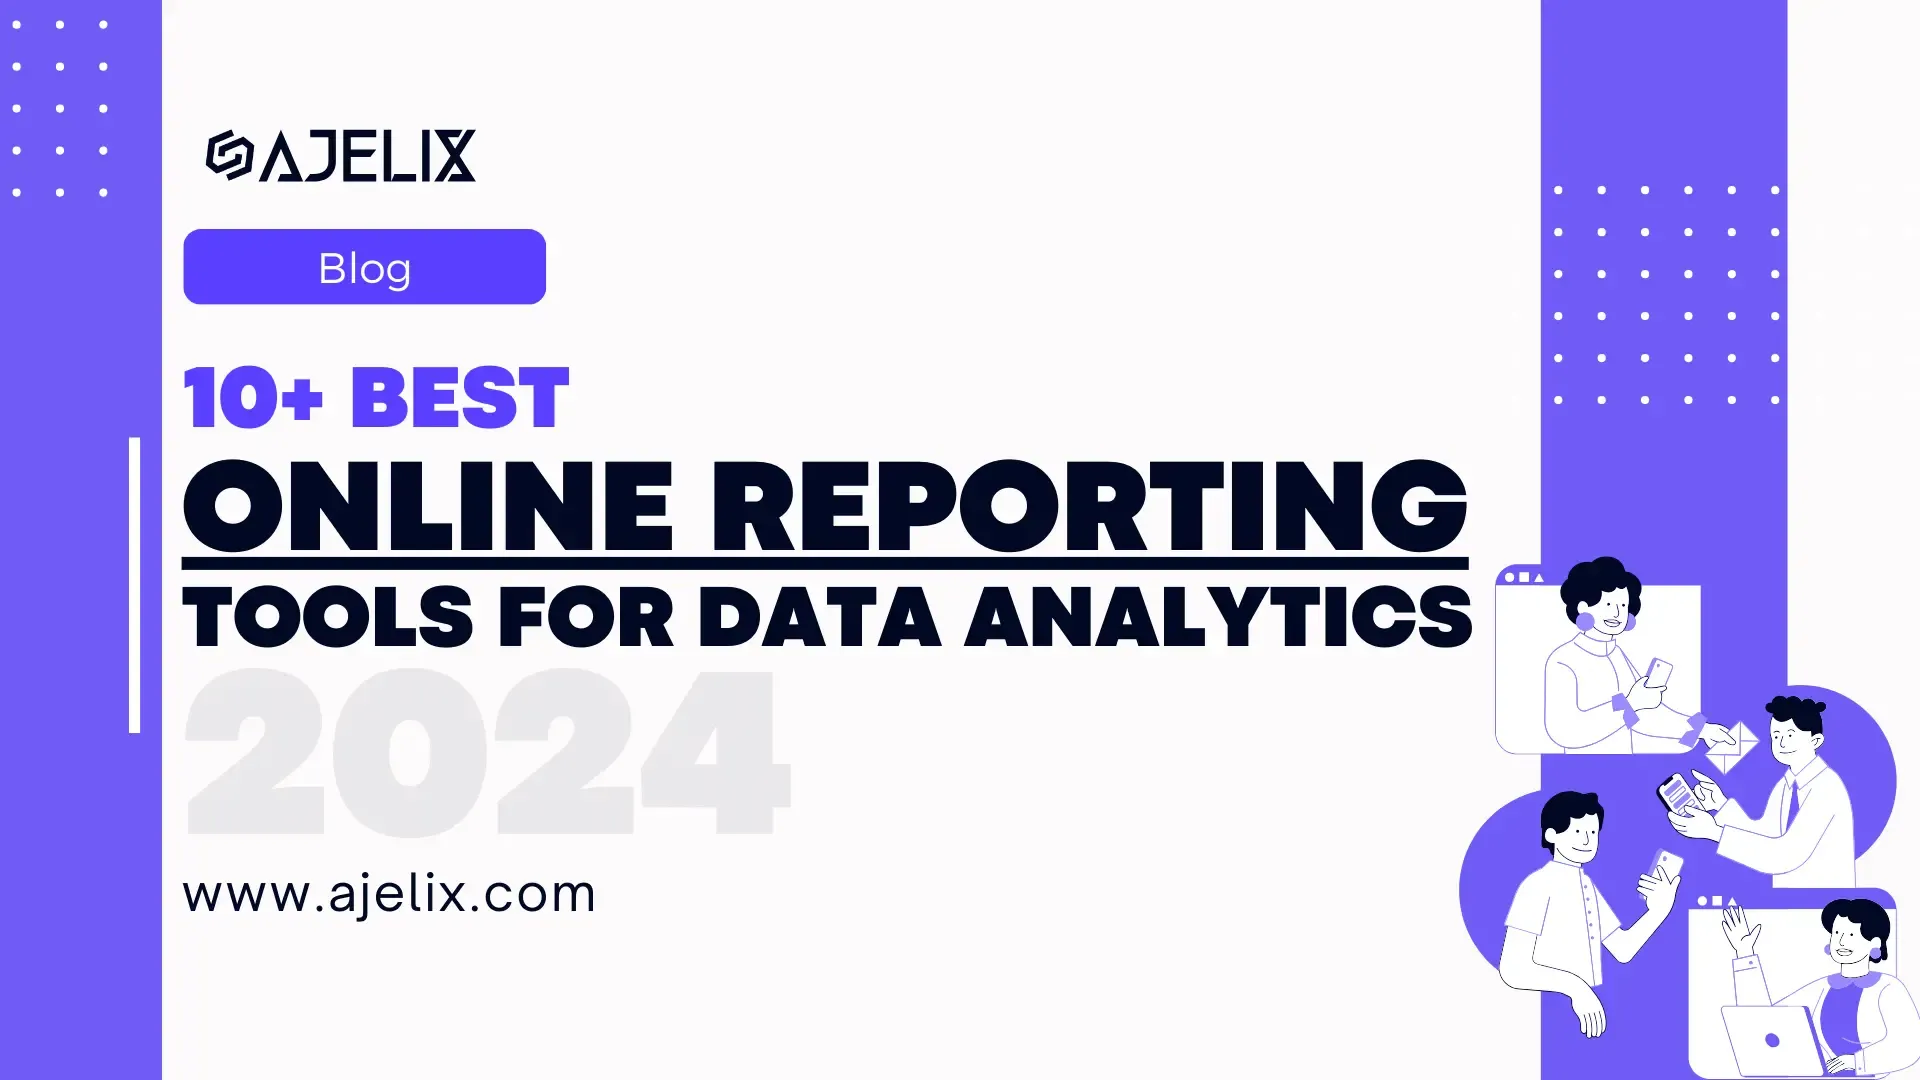 Best online reporting tools for data analytics banner